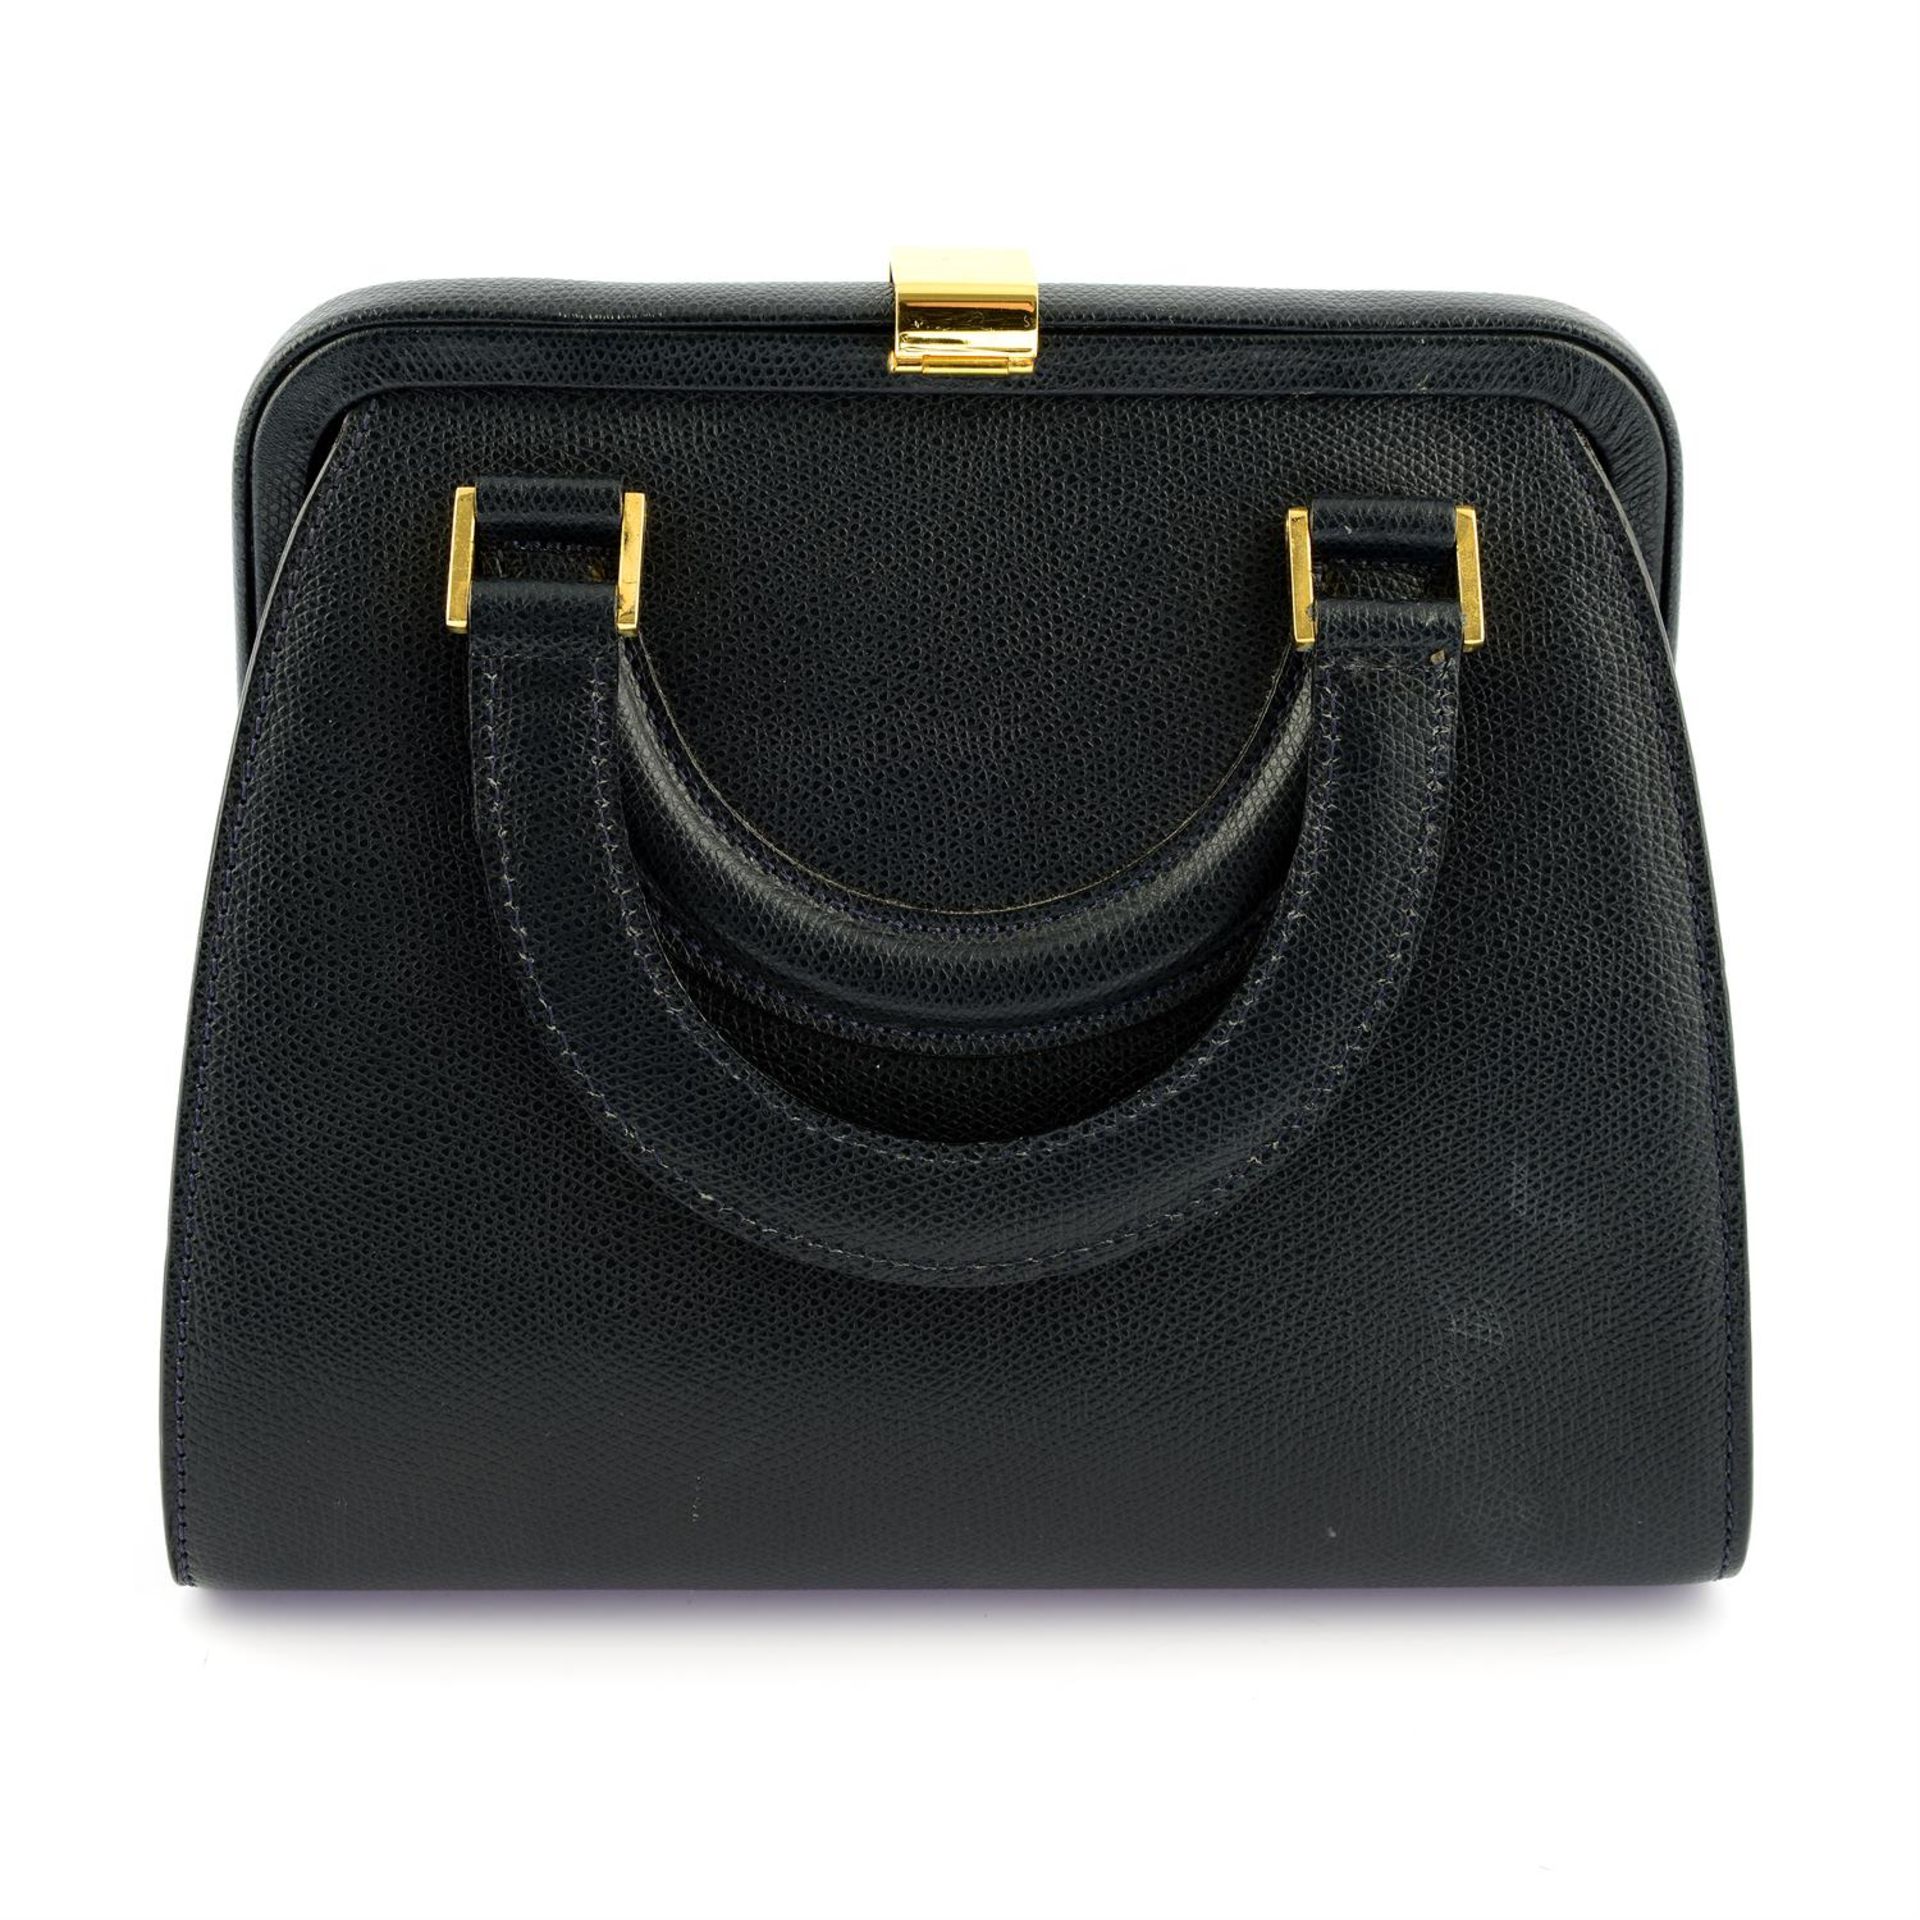 BALLY - a navy leather top handle bag. - Image 2 of 5